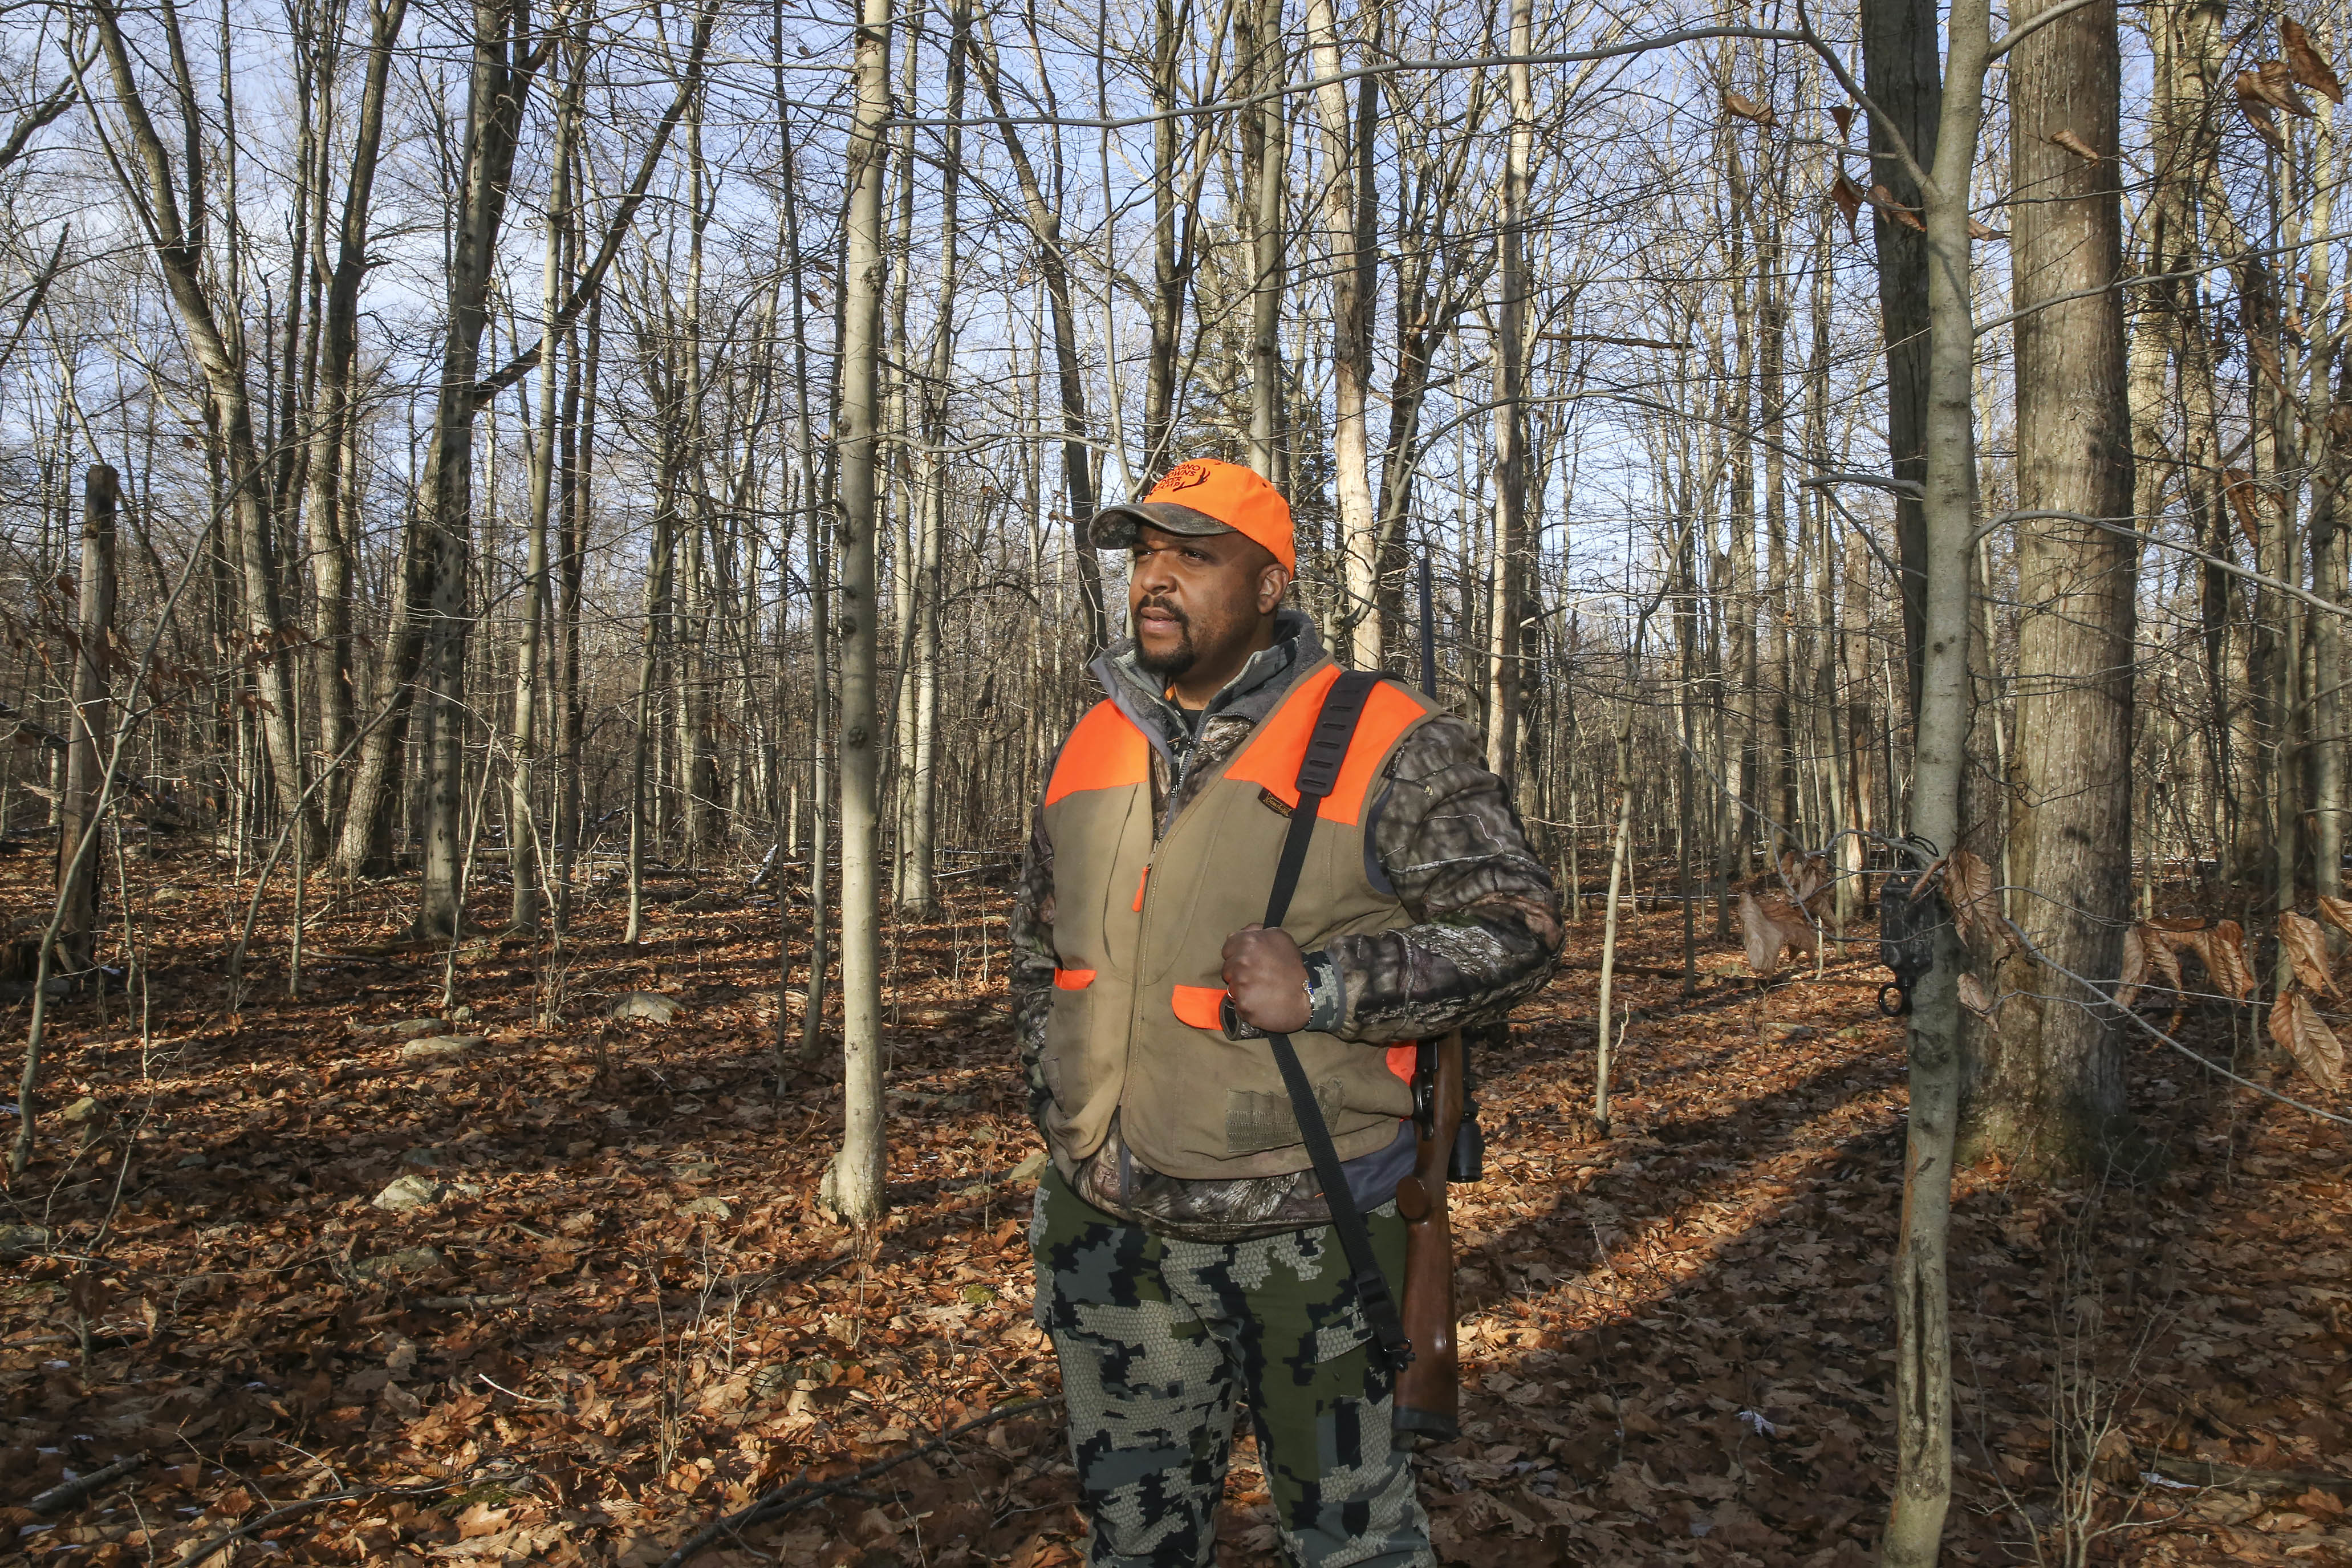 A Black-owned camp in the Poconos aims to make hunting more diverse